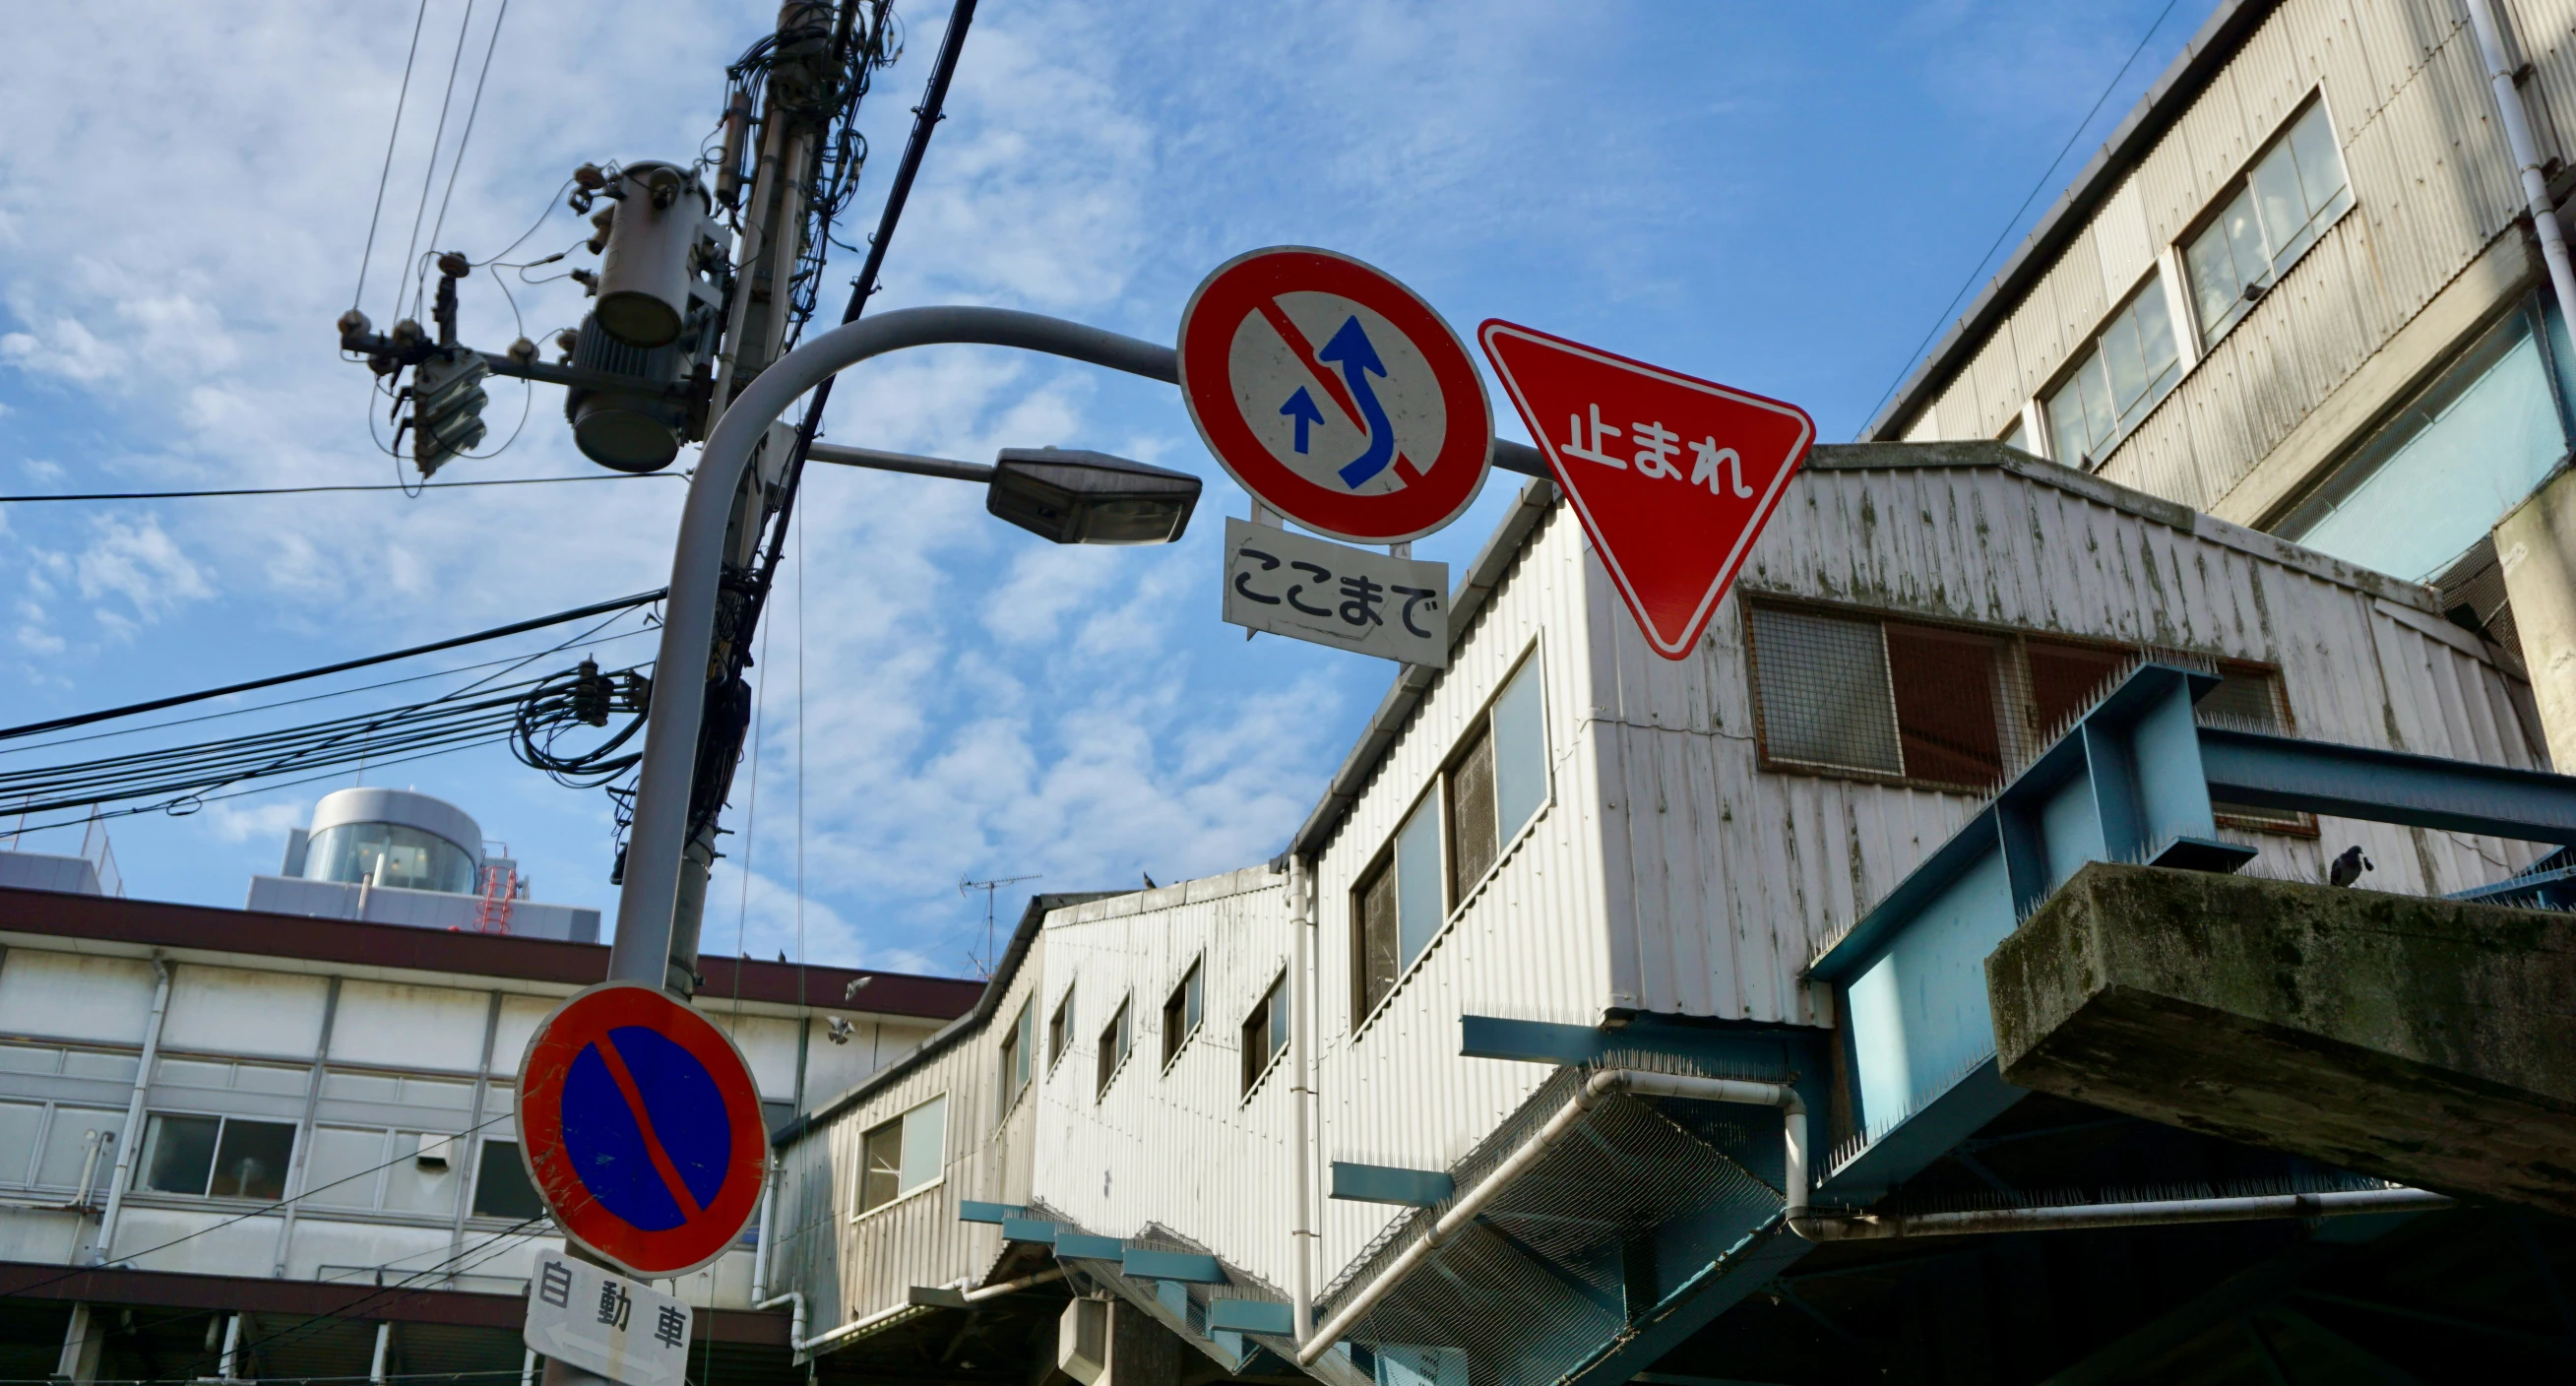 several street signs hanging near a high building